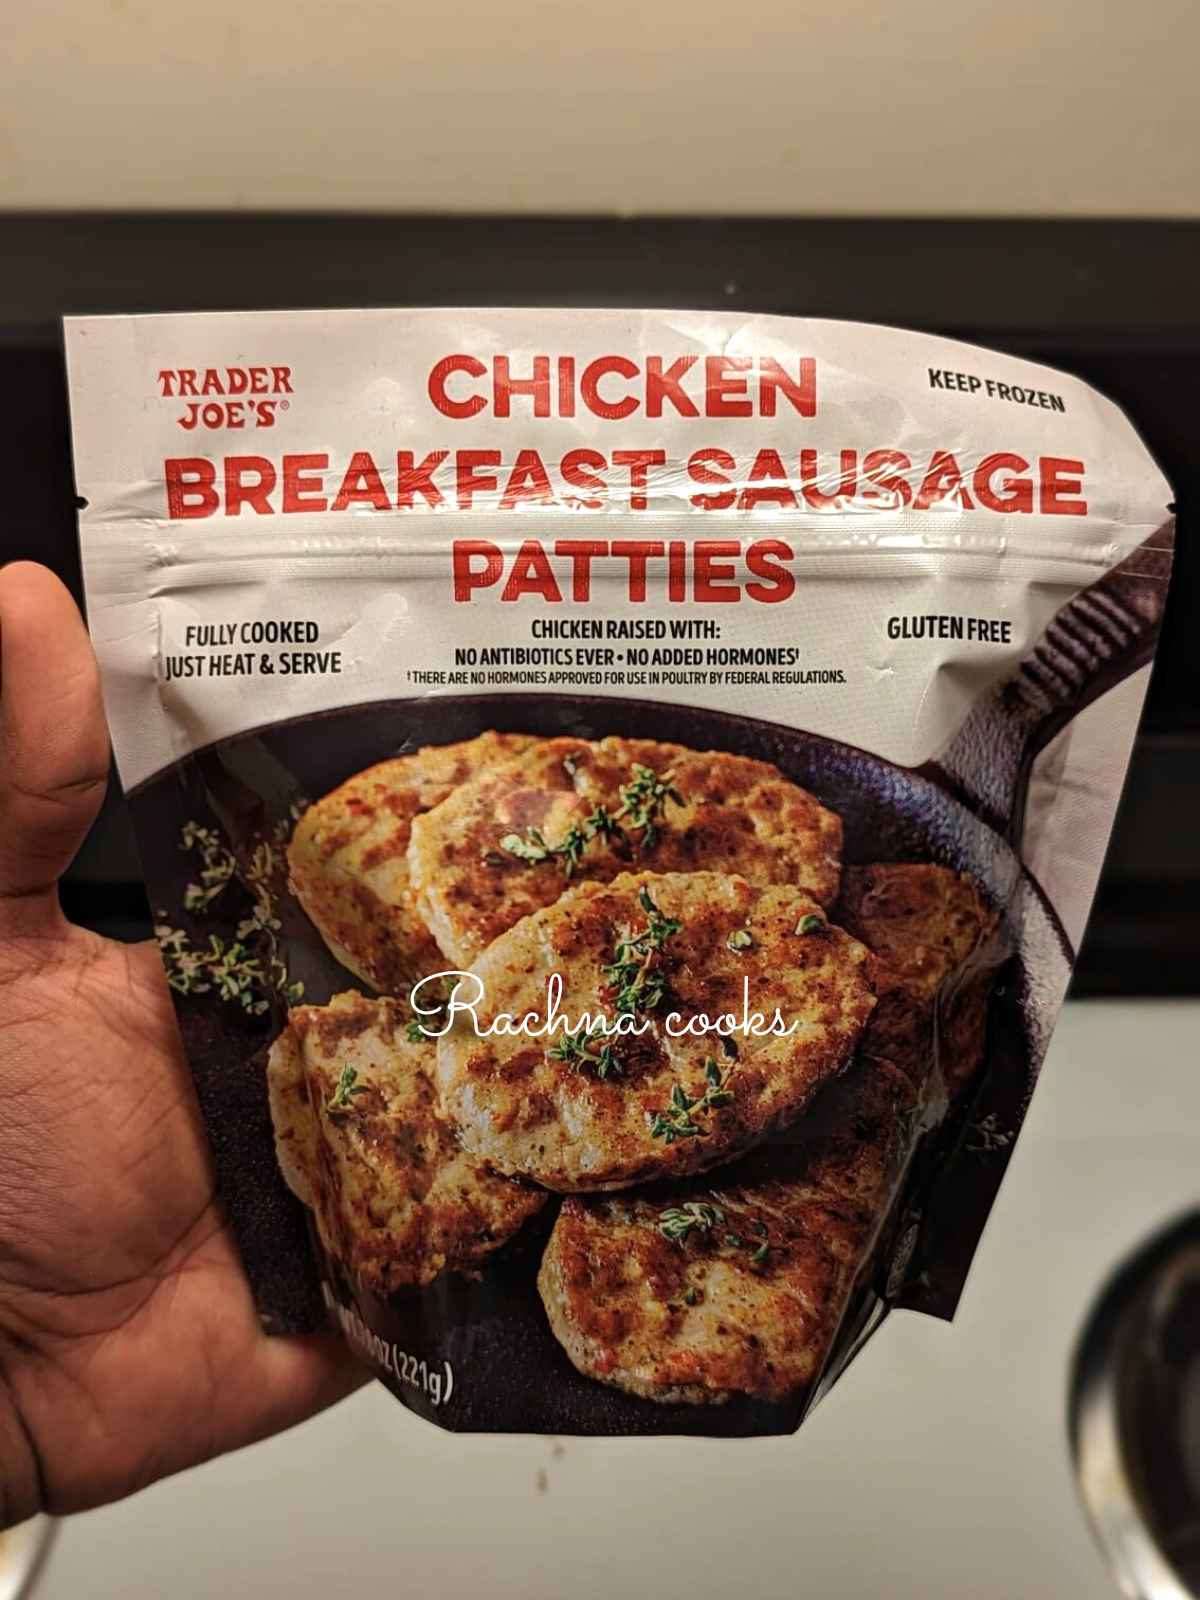 A pack of chicken sausage patties.